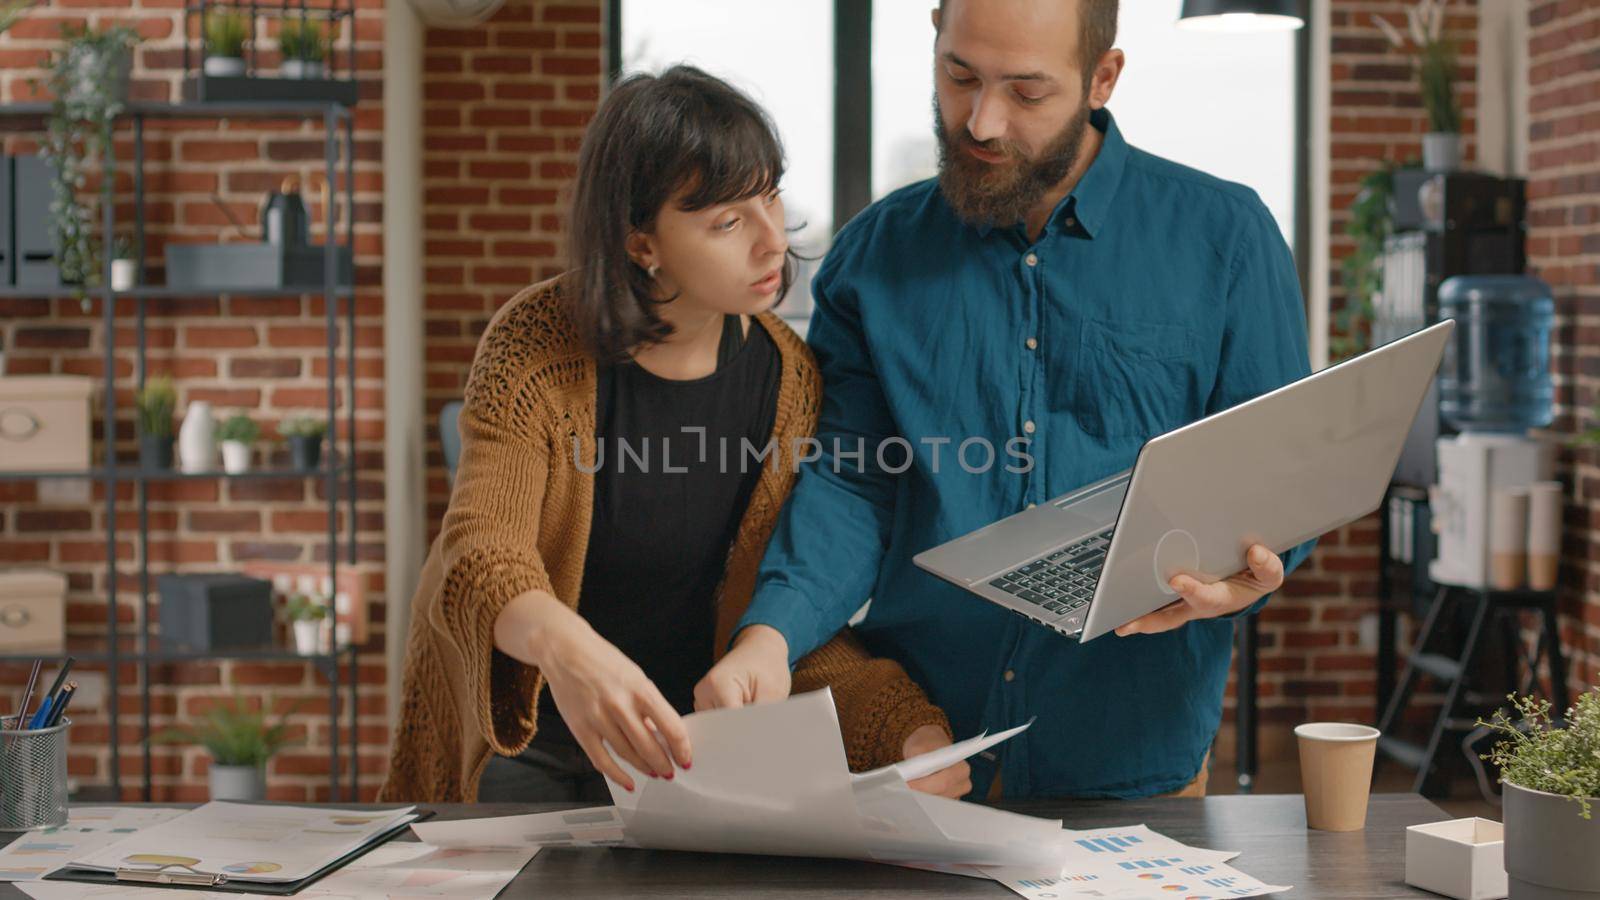 Business people checking laptop and rate charts papers to create marketing strategy. Man and woman brainstorming ideas while working on project planning and research in startup office.